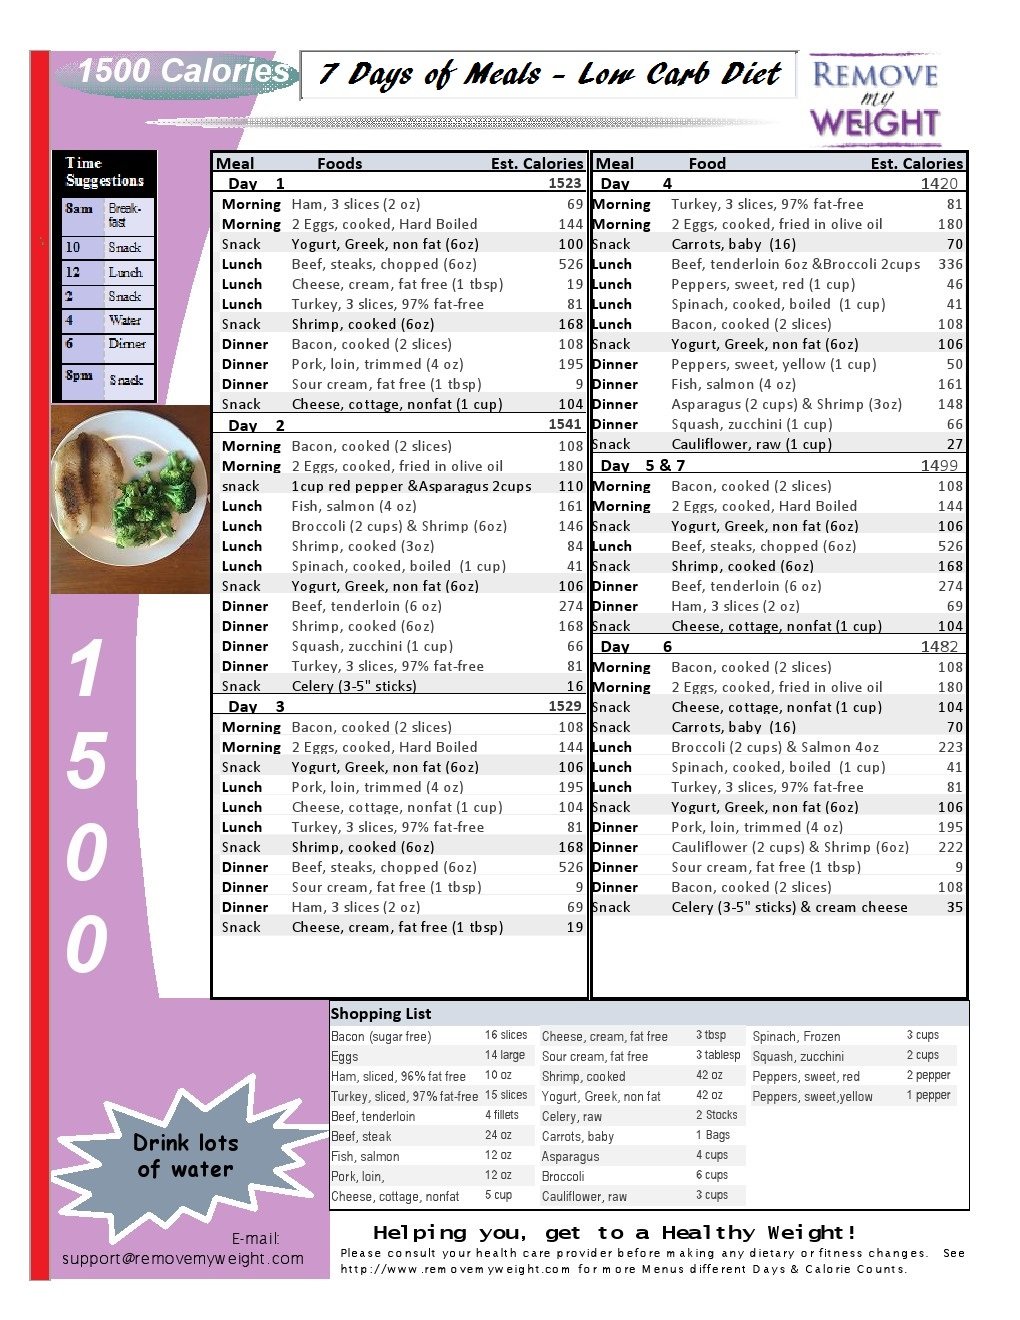 low carb meal planning